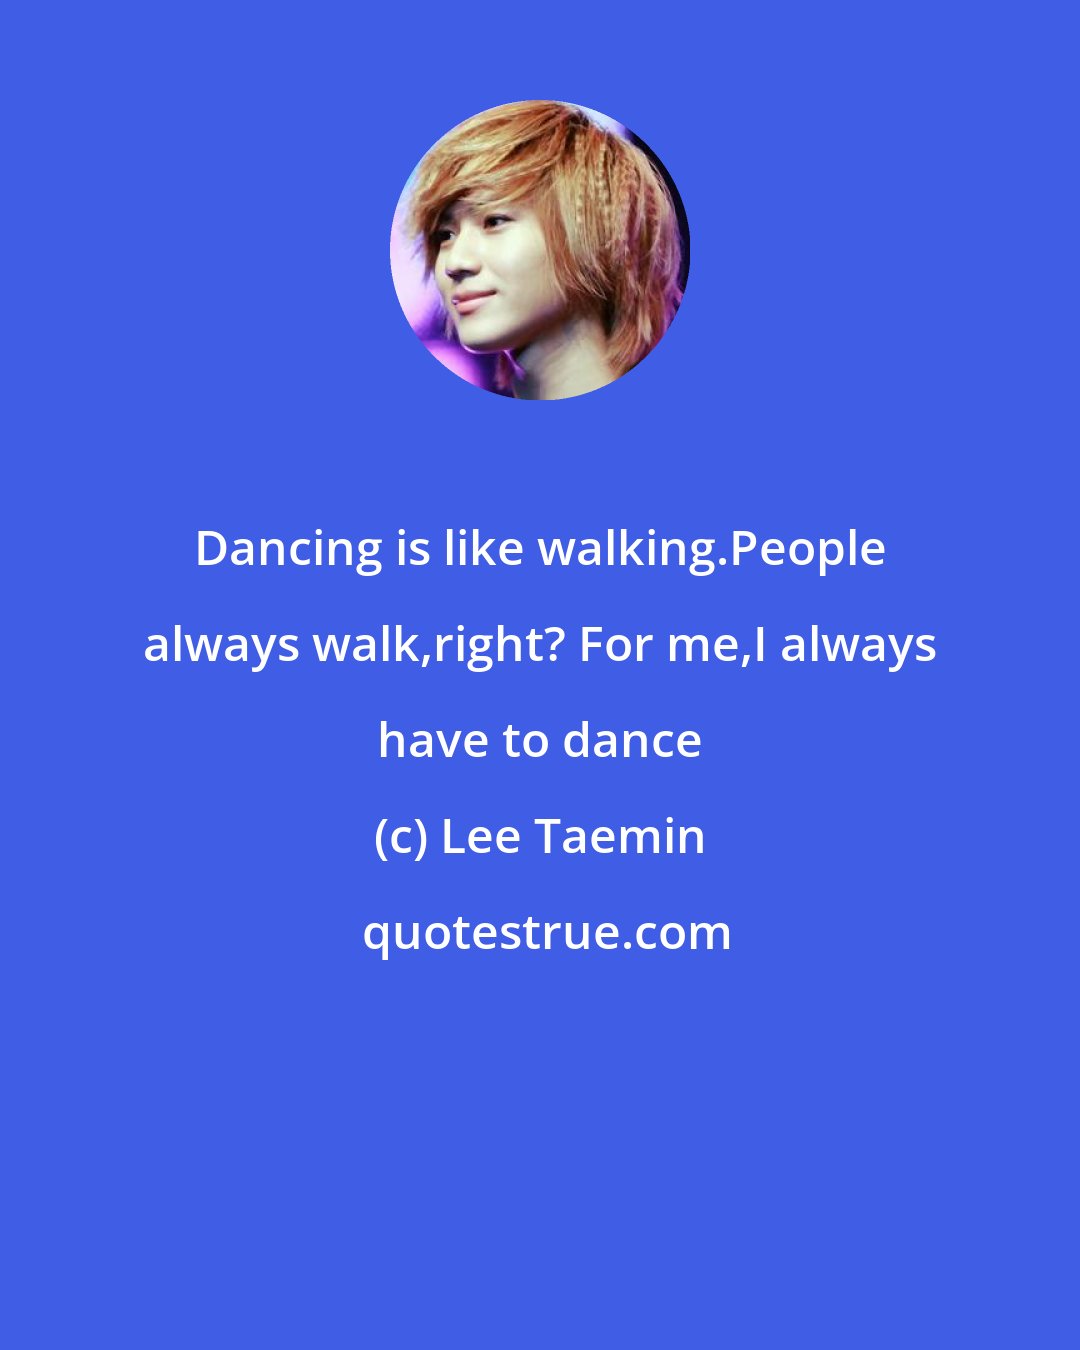 Lee Taemin: Dancing is like walking.People always walk,right? For me,I always have to dance